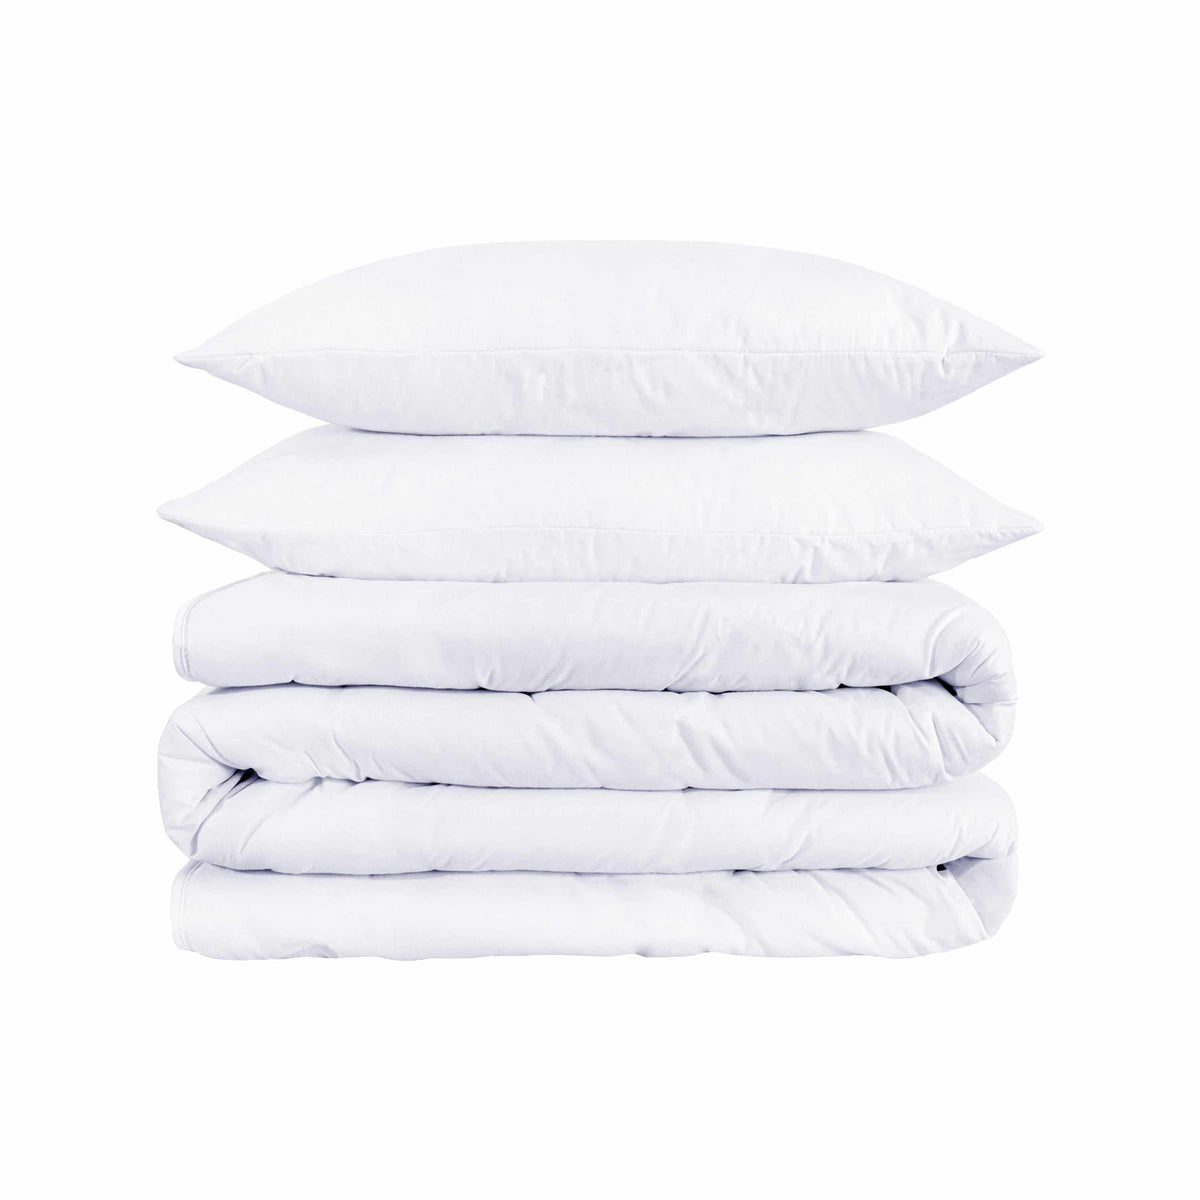 Superior Solid 1500 Thread Count Egyptian Cotton Duvet Cover Set - White